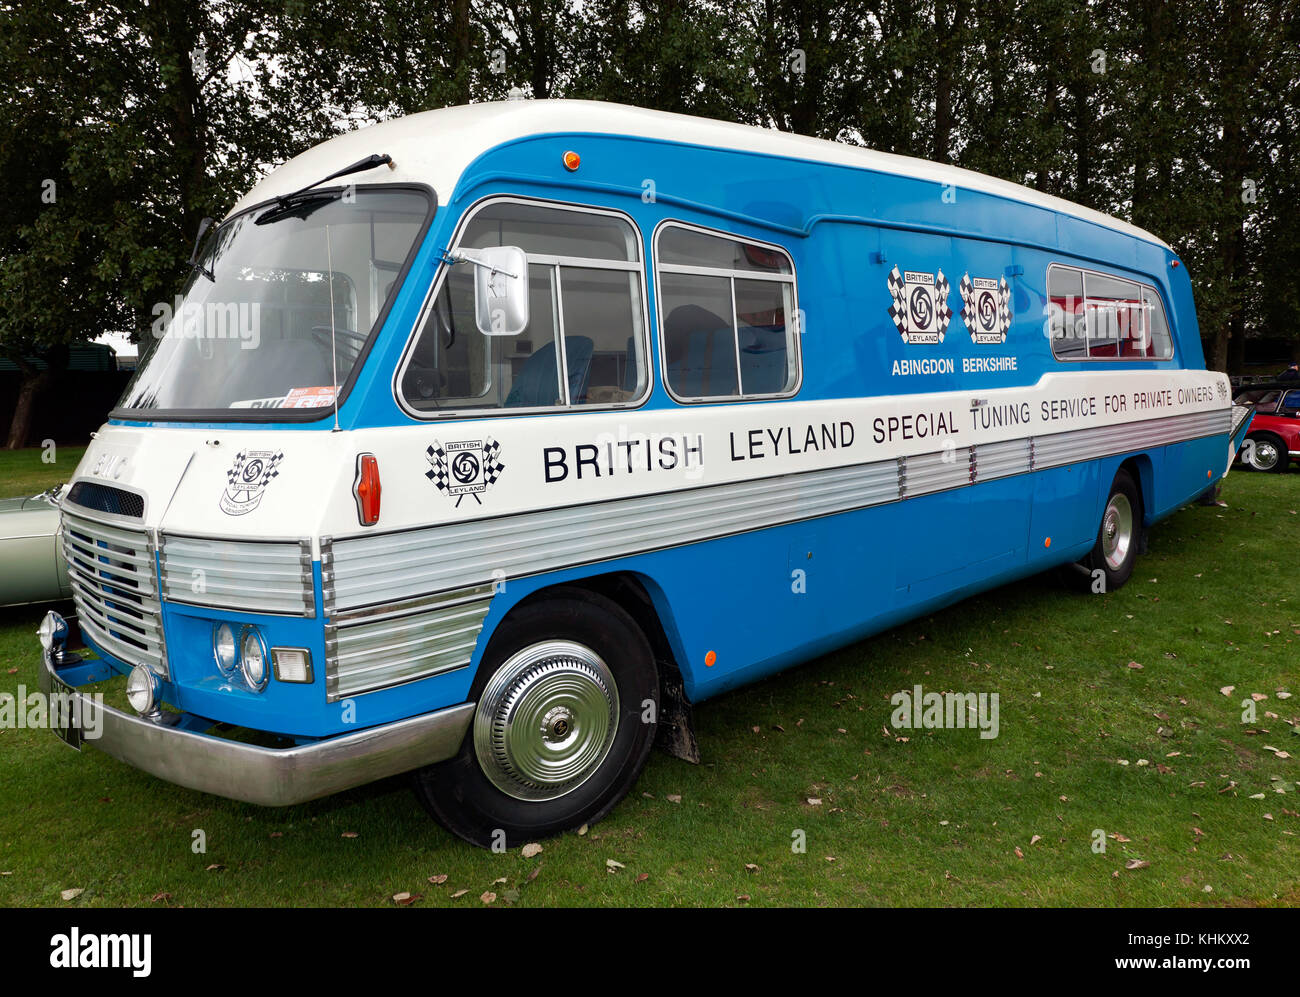 BMC Mobile Unit: British Leyland Special Tuning Departrment vehicle on display at the 2017 Silverstone Classic Stock Photo